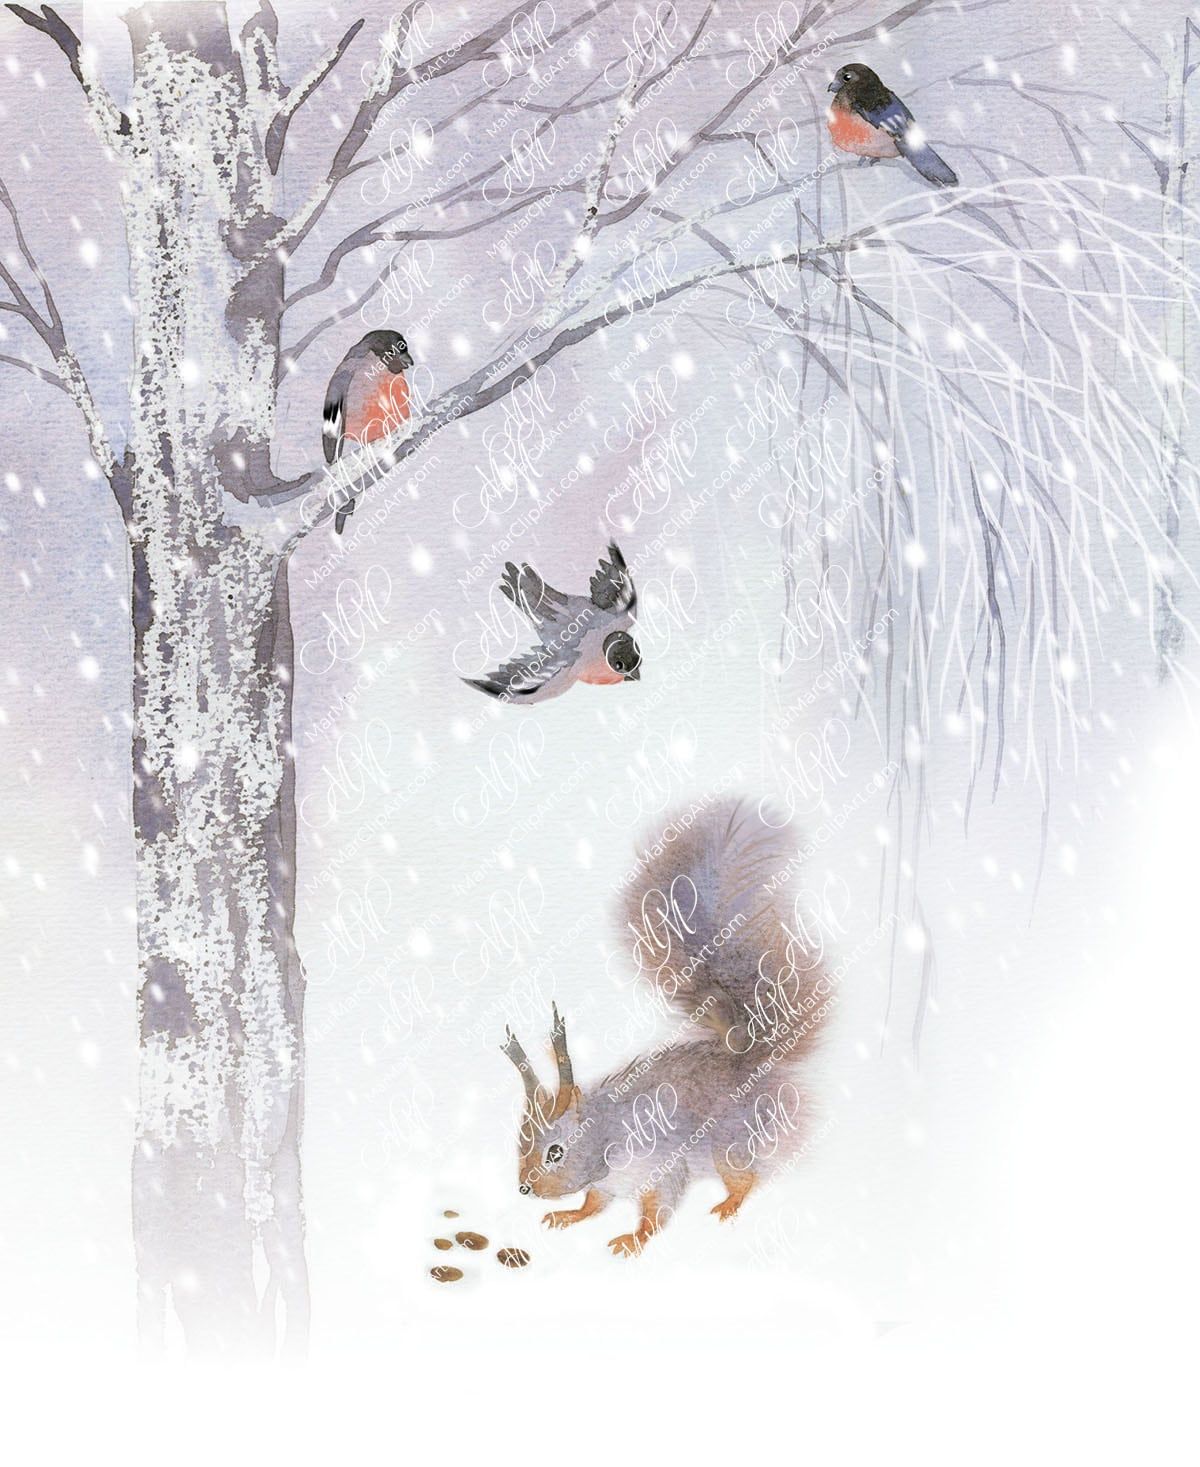 Winter time bullfinches and squirrel in winter forest. Watercolor illustration